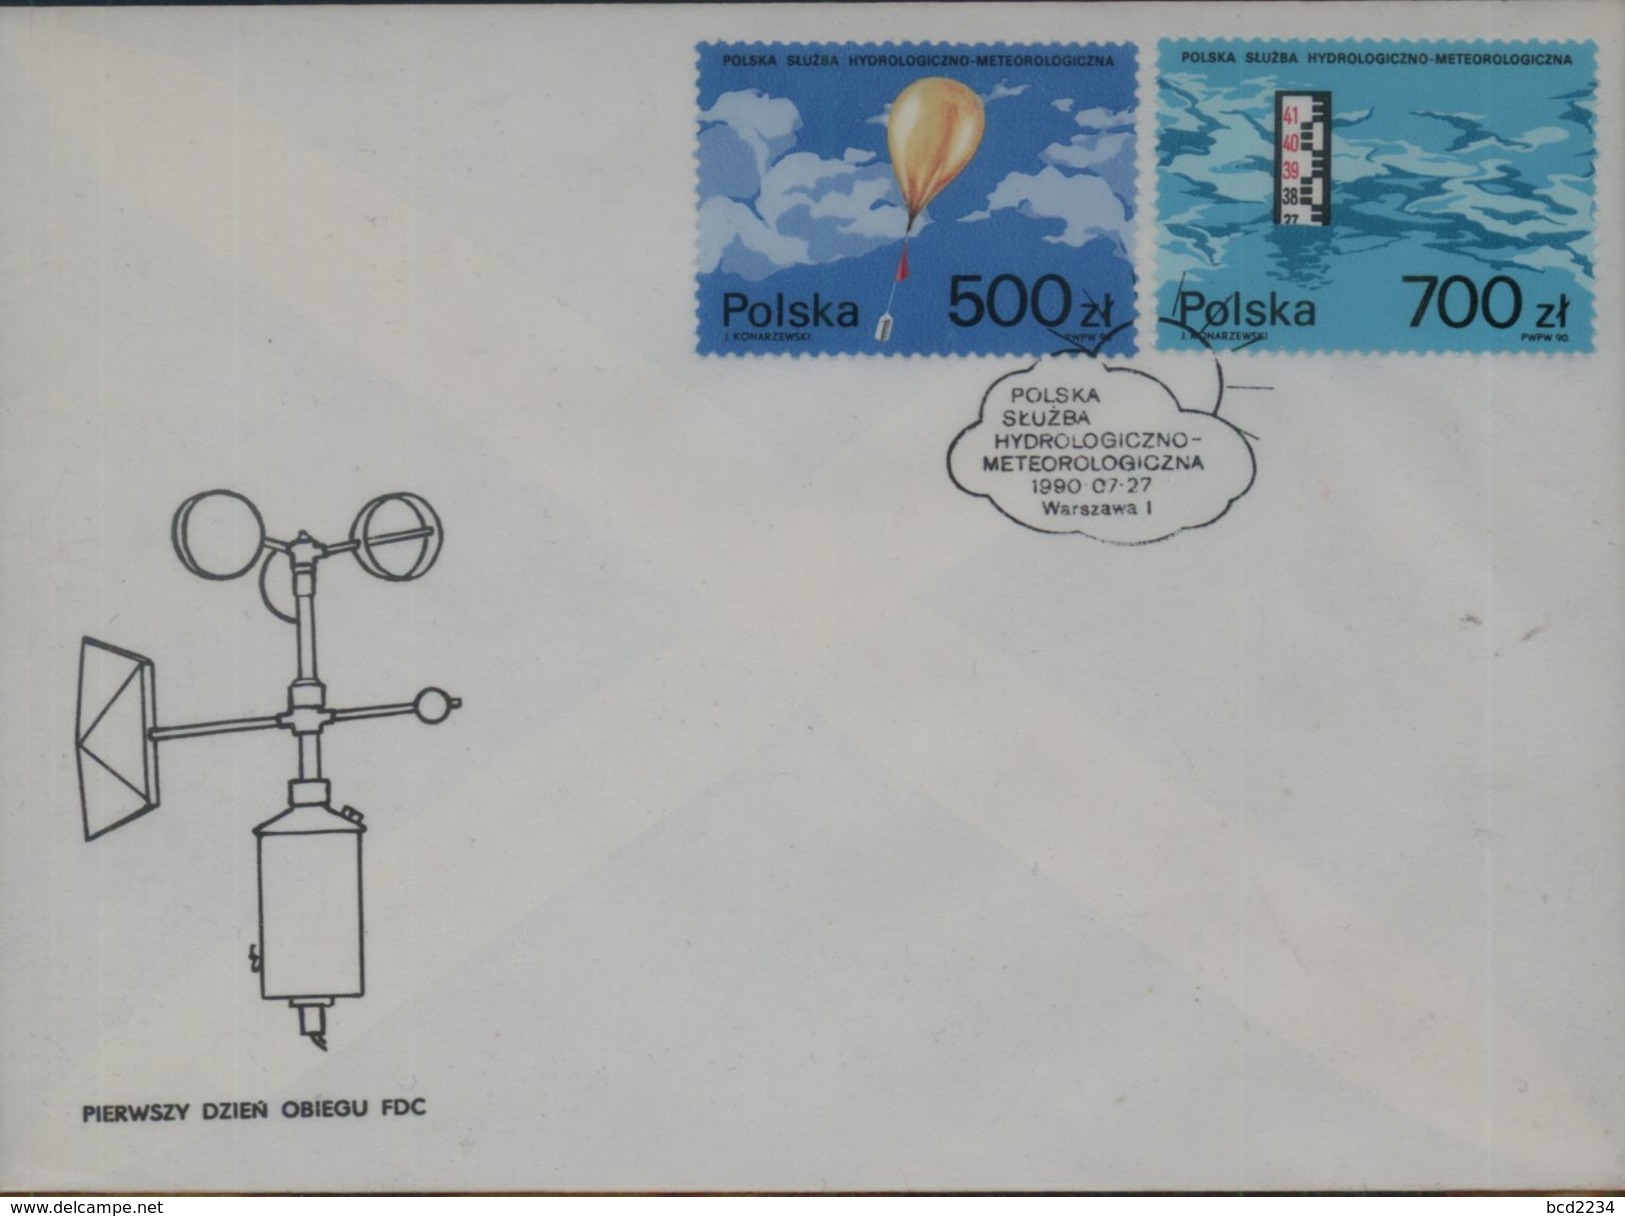 POLAND FDC 1990 POLISH HYDROLOGY & METEOROLOGY SERVICE WEATHER BALLOON WATER HEIGHT GAUGE - FDC